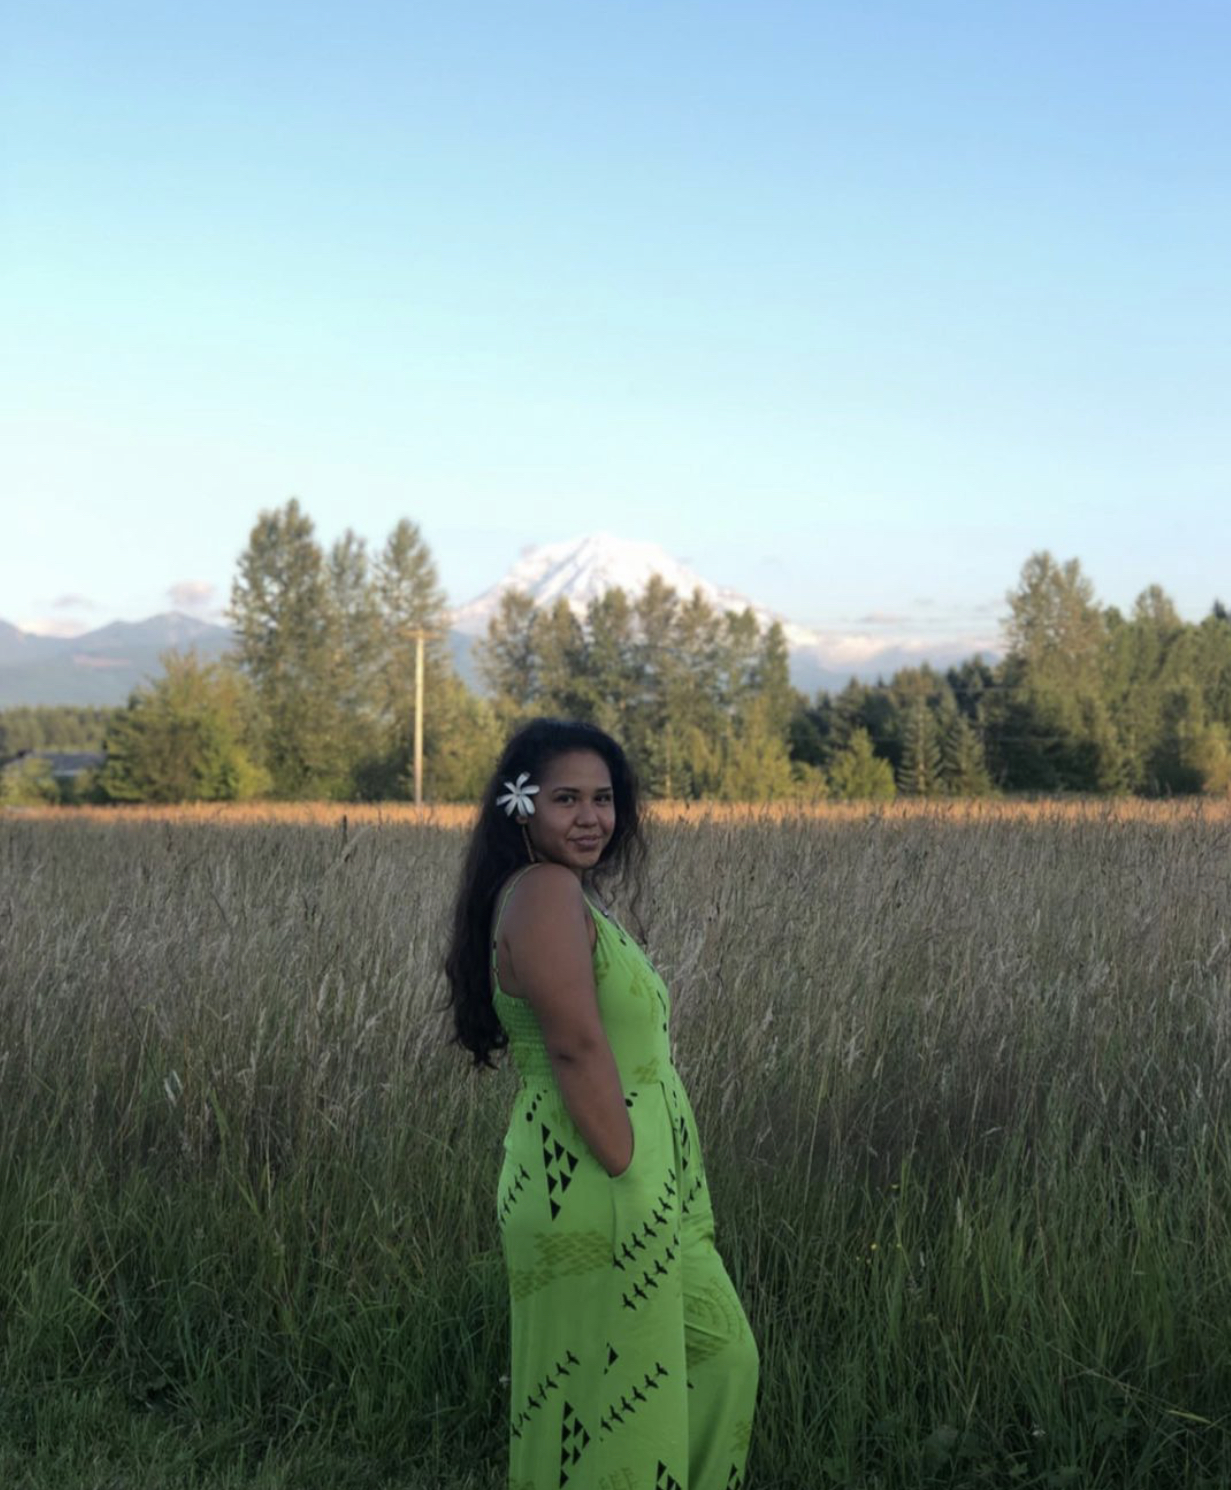 Ihilani stands in a field in a bright green dress and a flower behind her ear